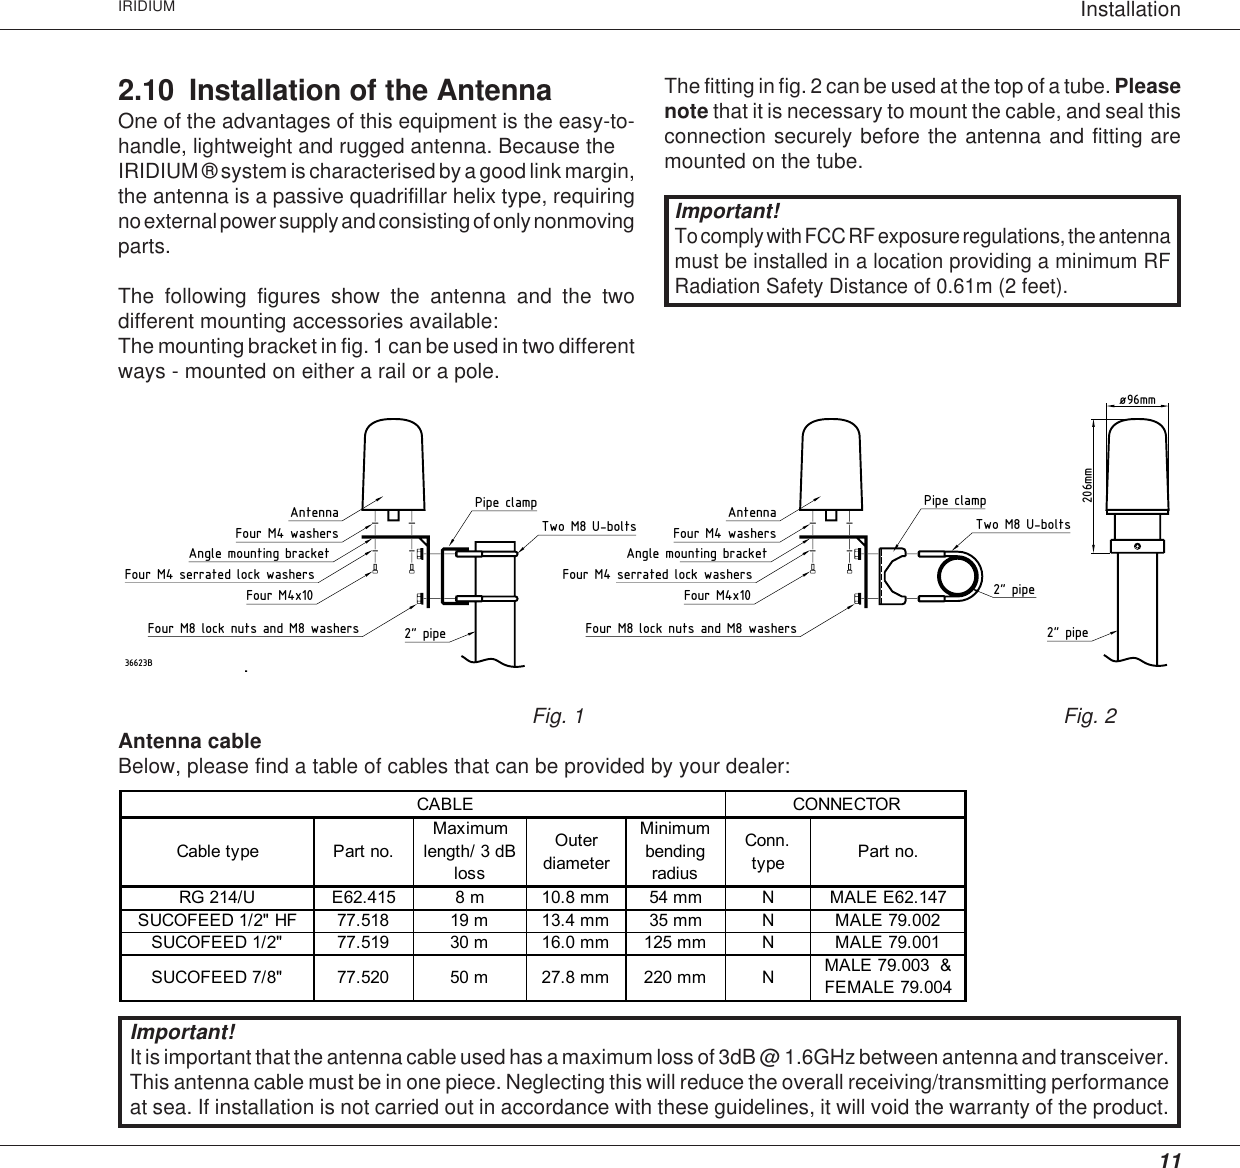 11InstallationIRIDIUMThe fitting in fig. 2 can be used at the top of a tube. Pleasenote that it is necessary to mount the cable, and seal thisconnection securely before the antenna and fitting aremounted on the tube.2&quot; pipeAntenna Pipe clampTwo M8 U-bolts2&quot; pipe36623B206mm2&quot; pipeFour M4x10Four M4 serrated lock washersAngle mounting bracketFour M4 washersFour M8 lock nuts and M8 washersTwo M8 U-boltsPipe clampø96mmAntennaFour M4x10Four M4 serrated lock washersAngle mounting bracketFour M4 washersFour M8 lock nuts and M8 washersFig. 1 Fig. 2Antenna cableBelow, please find a table of cables that can be provided by your dealer:      CABLE             CONNECTORCable type Part no.Maximum length/ 3 dB lossOuter diameterMinimum bending radiusConn. type Part no. RG 214/U E62.415 8 m 10.8 mm 54 mm N MALE E62.147SUCOFEED 1/2&quot; HF 77.518 19 m 13.4 mm 35 mm N MALE 79.002SUCOFEED 1/2&quot;  77.519 30 m 16.0 mm 125 mm N MALE 79.001SUCOFEED 7/8&quot; 77.520 50 m 27.8 mm 220 mm N MALE 79.003  &amp; FEMALE 79.0042.10 Installation of the AntennaOne of the advantages of this equipment is the easy-to-handle, lightweight and rugged antenna. Because theIRIDIUM ® system is characterised by a good link margin,the antenna is a passive quadrifillar helix type, requiringno external power supply and consisting of only nonmovingparts.The following figures show the antenna and the twodifferent mounting accessories available:The mounting bracket in fig. 1 can be used in two differentways - mounted on either a rail or a pole.Important!To comply with FCC RF exposure regulations, the antennamust be installed in a location providing a minimum RFRadiation Safety Distance of 0.61m (2 feet).Important!It is important that the antenna cable used has a maximum loss of 3dB @ 1.6GHz between antenna and transceiver.This antenna cable must be in one piece. Neglecting this will reduce the overall receiving/transmitting performanceat sea. If installation is not carried out in accordance with these guidelines, it will void the warranty of the product.